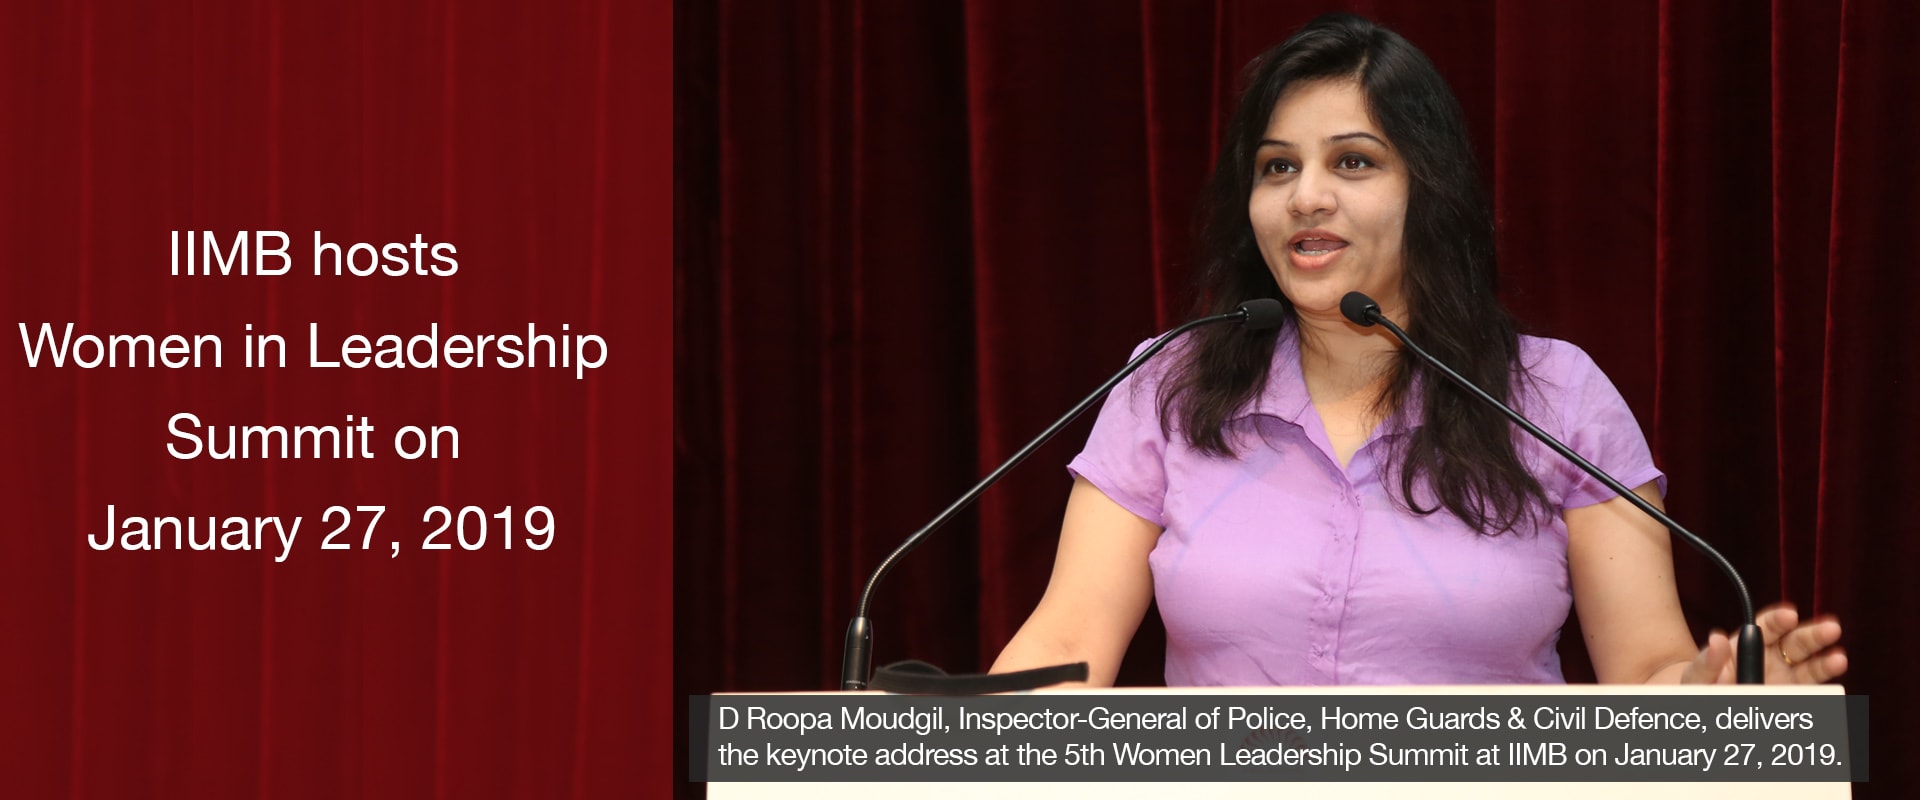 D Roopa Moudgil, Inspector-General of Police